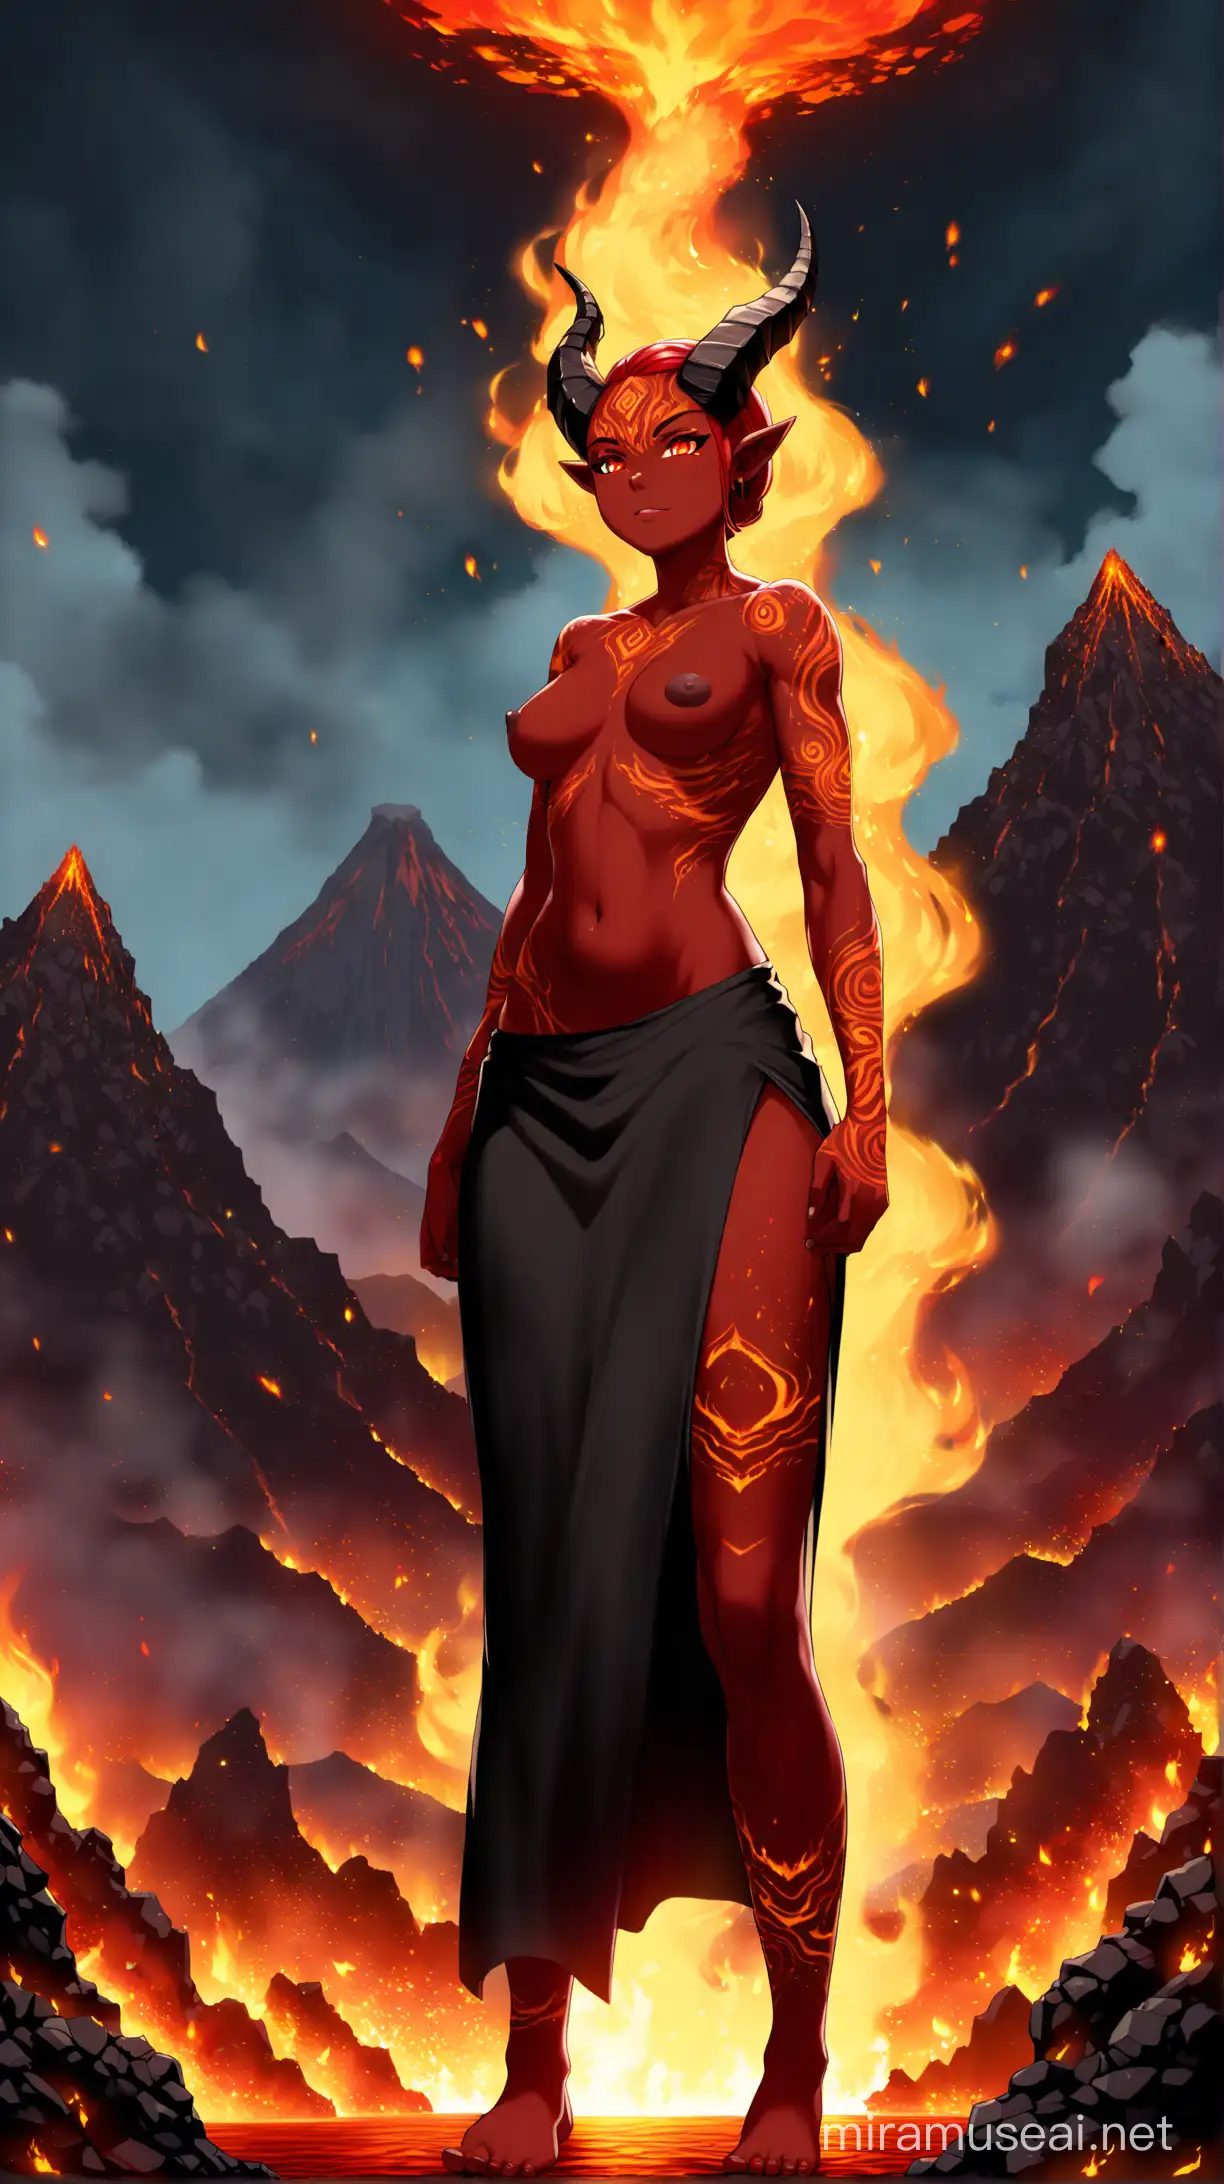 (red skin: 1.5), (flat breasts: 1.5), topless, long skirt, black skirt, fire hair, glowing eyes, red eyes, fire elemental, ifrit, 1girl, female, (black nipples: 1.2), horns, black horns, big horns, volcano, volcanic background, bare breasts, barefeet, solo, character showcase, front view, standing, (low perspective: 1.5), lava, fire, magma, ash, pale, red, thin, big butt, big ass, slim, fantasy, elemental, blue fire